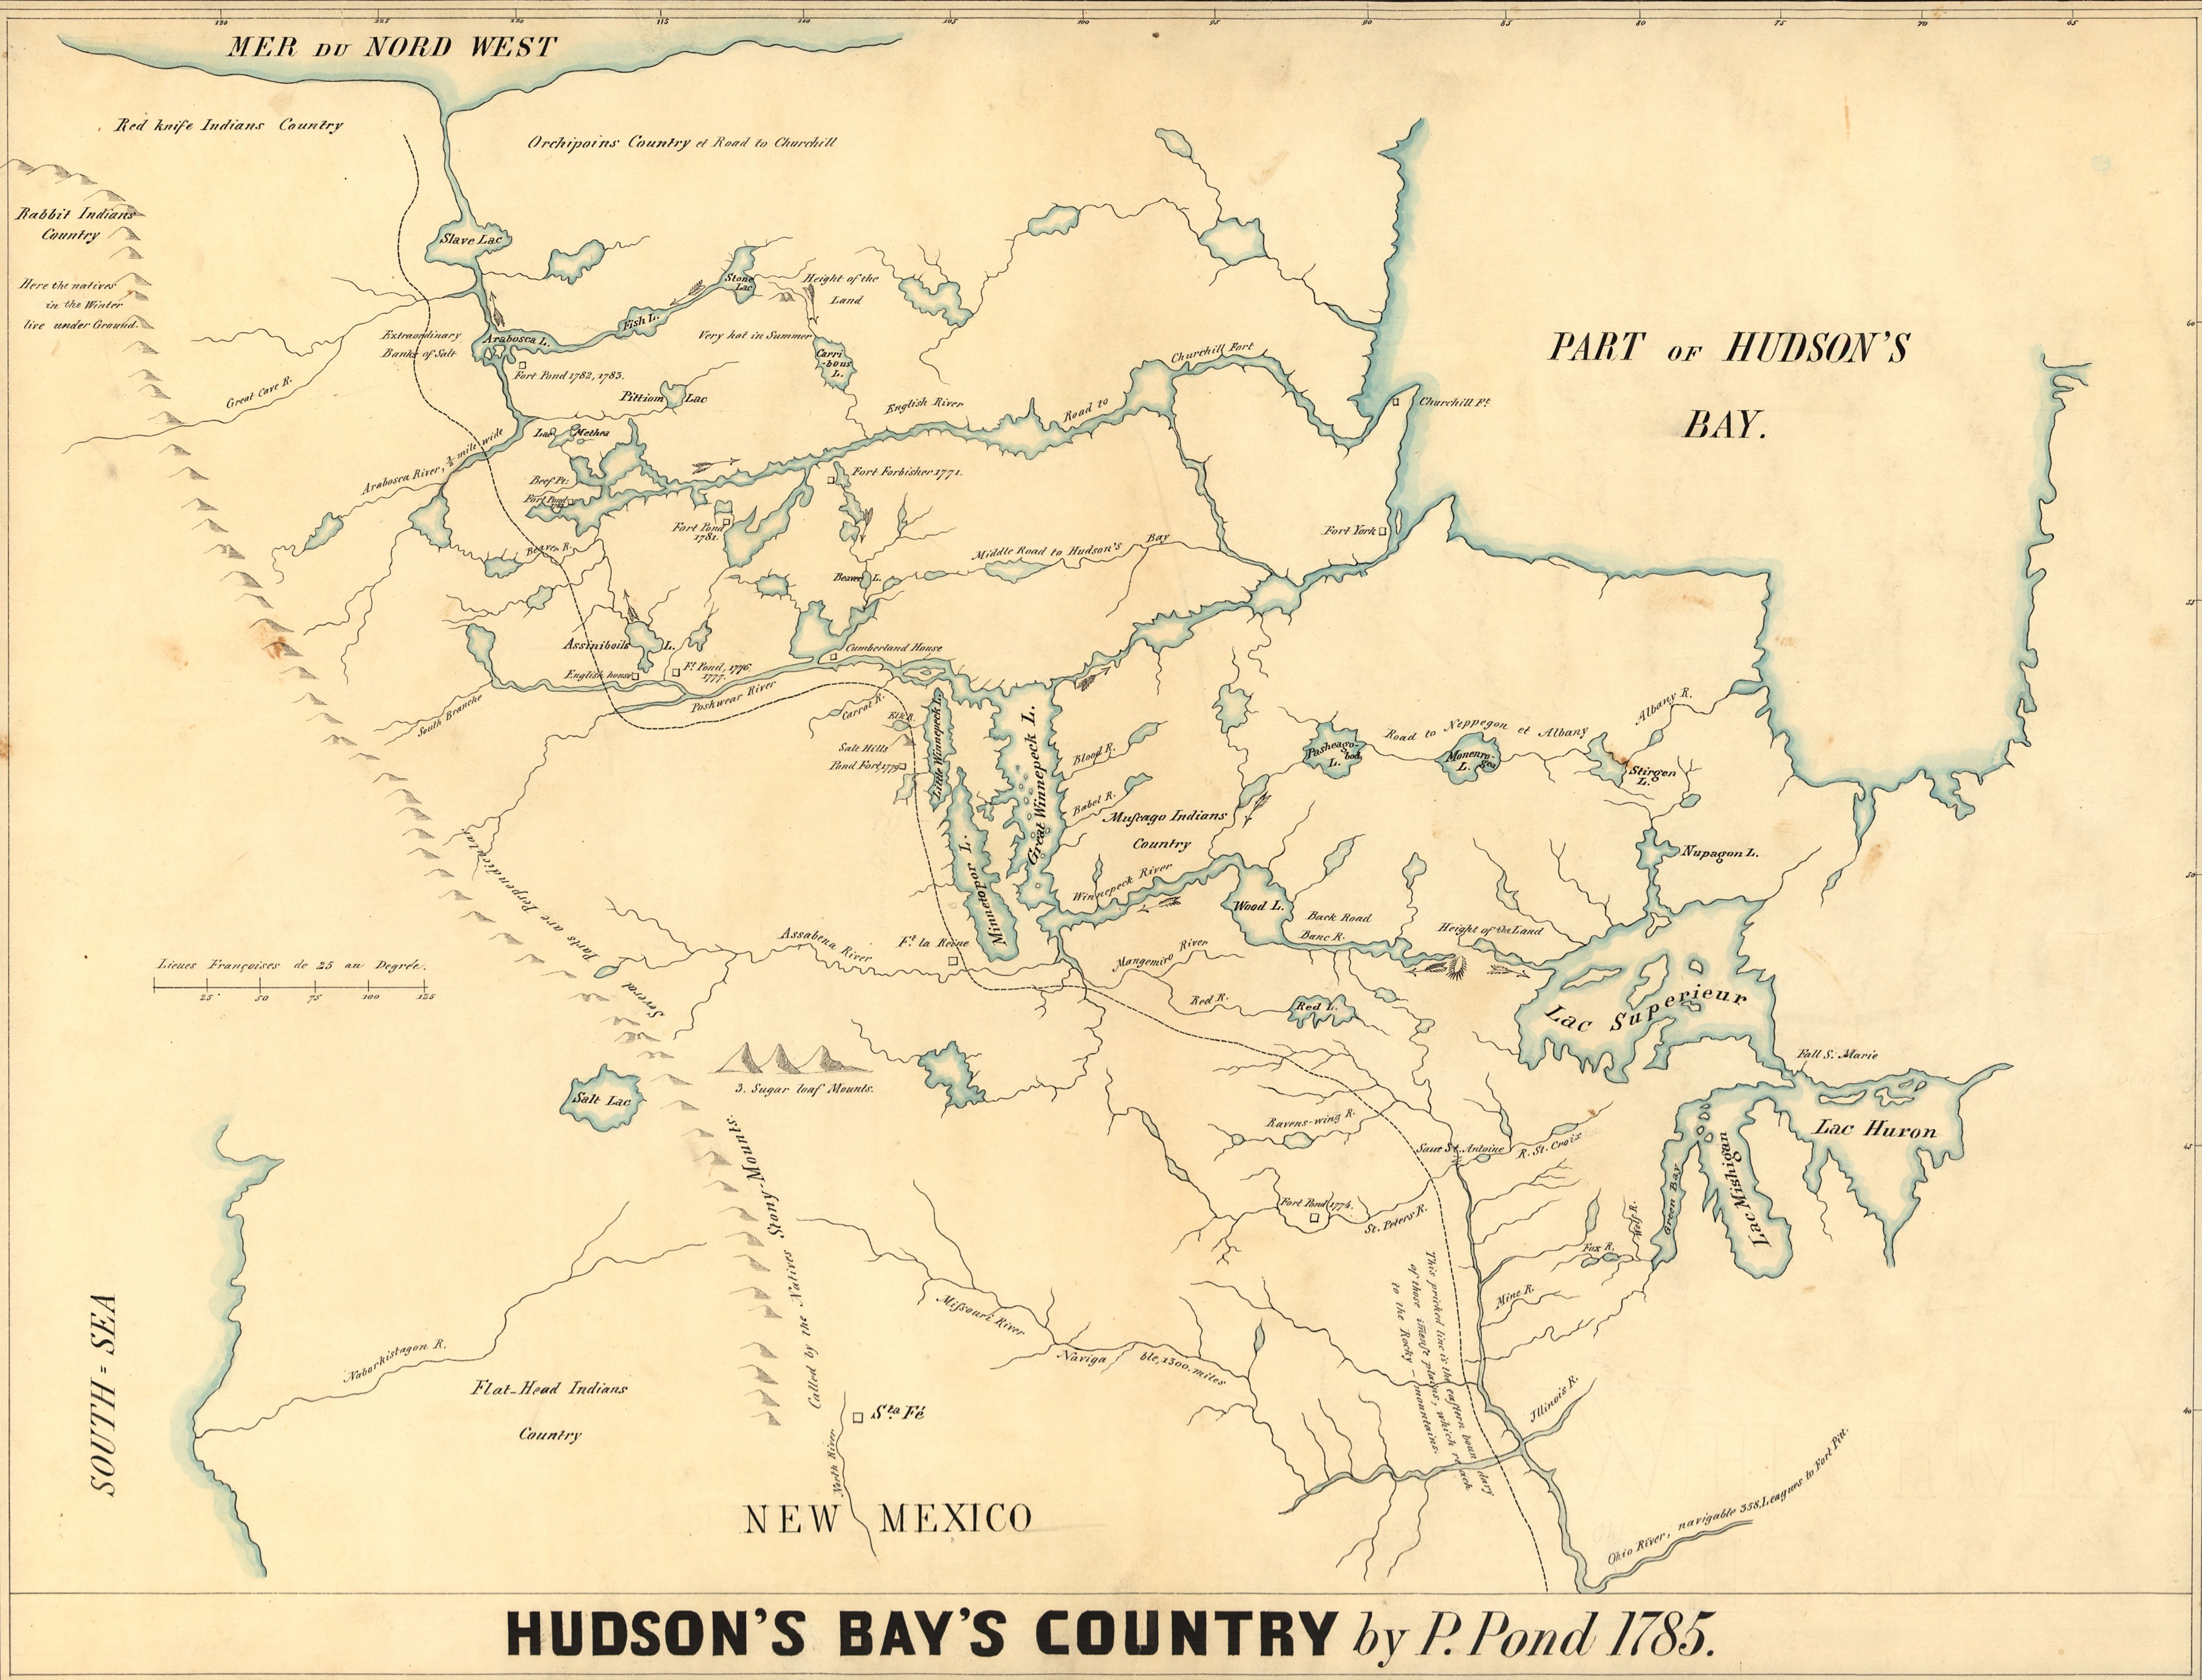 Hudson's Bay's Country (Peter Pond 1785)